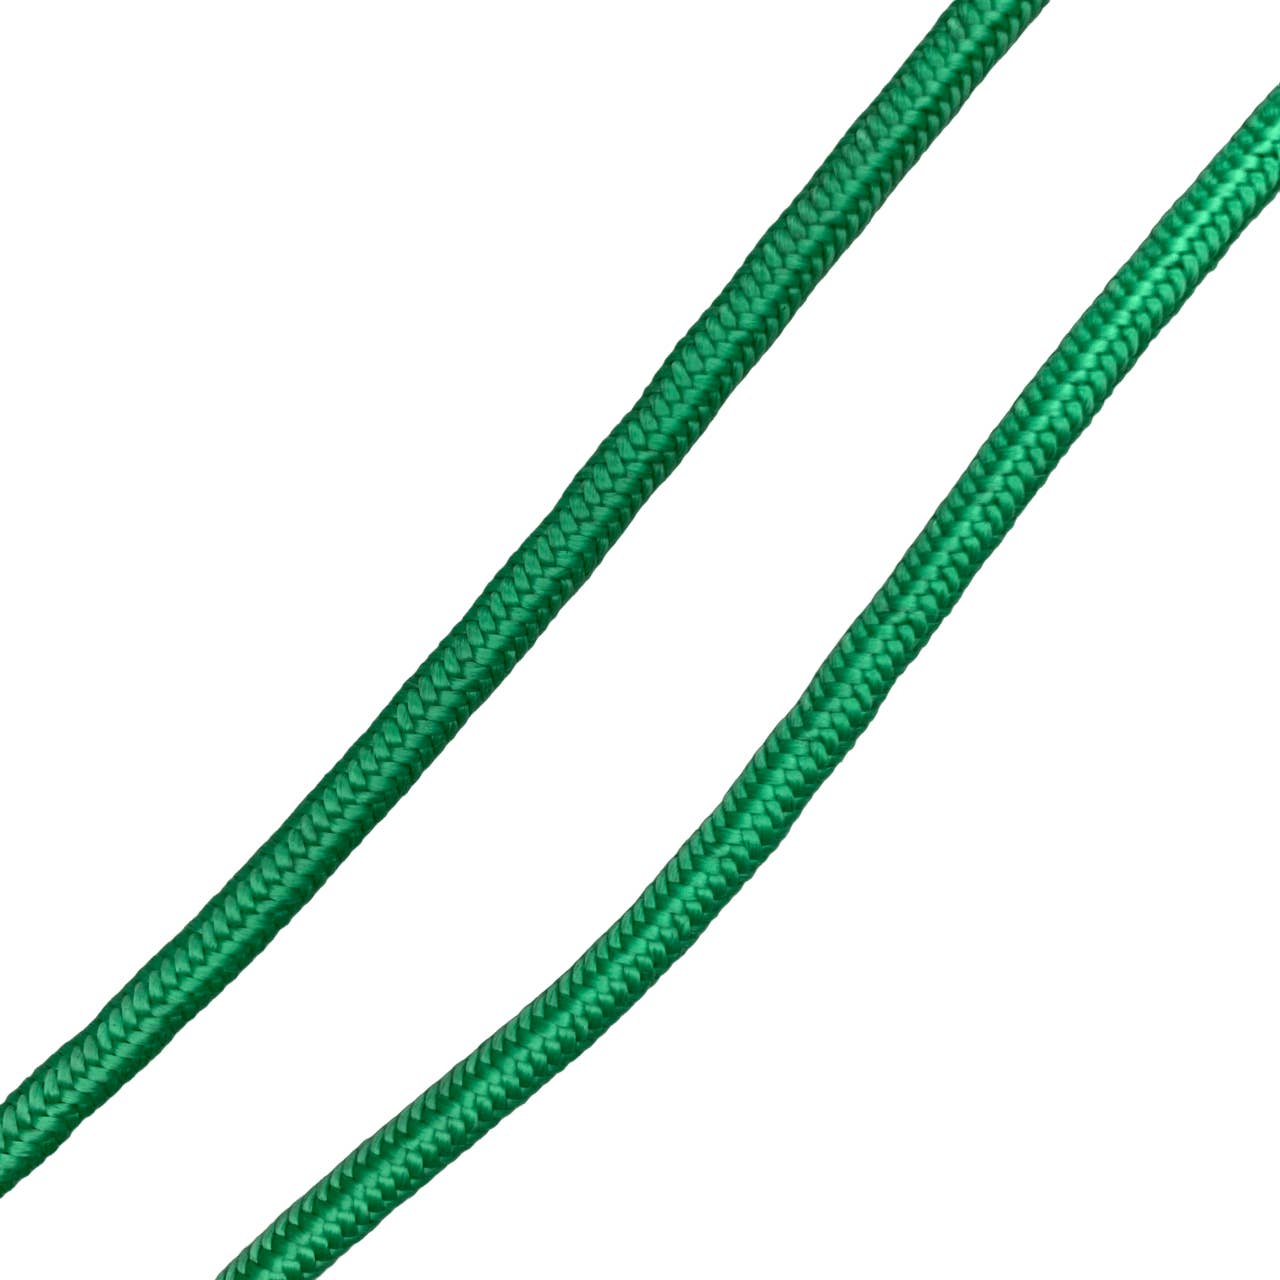 Nylon Solid Loop Rope Trail Reins in Bright Green - 8'